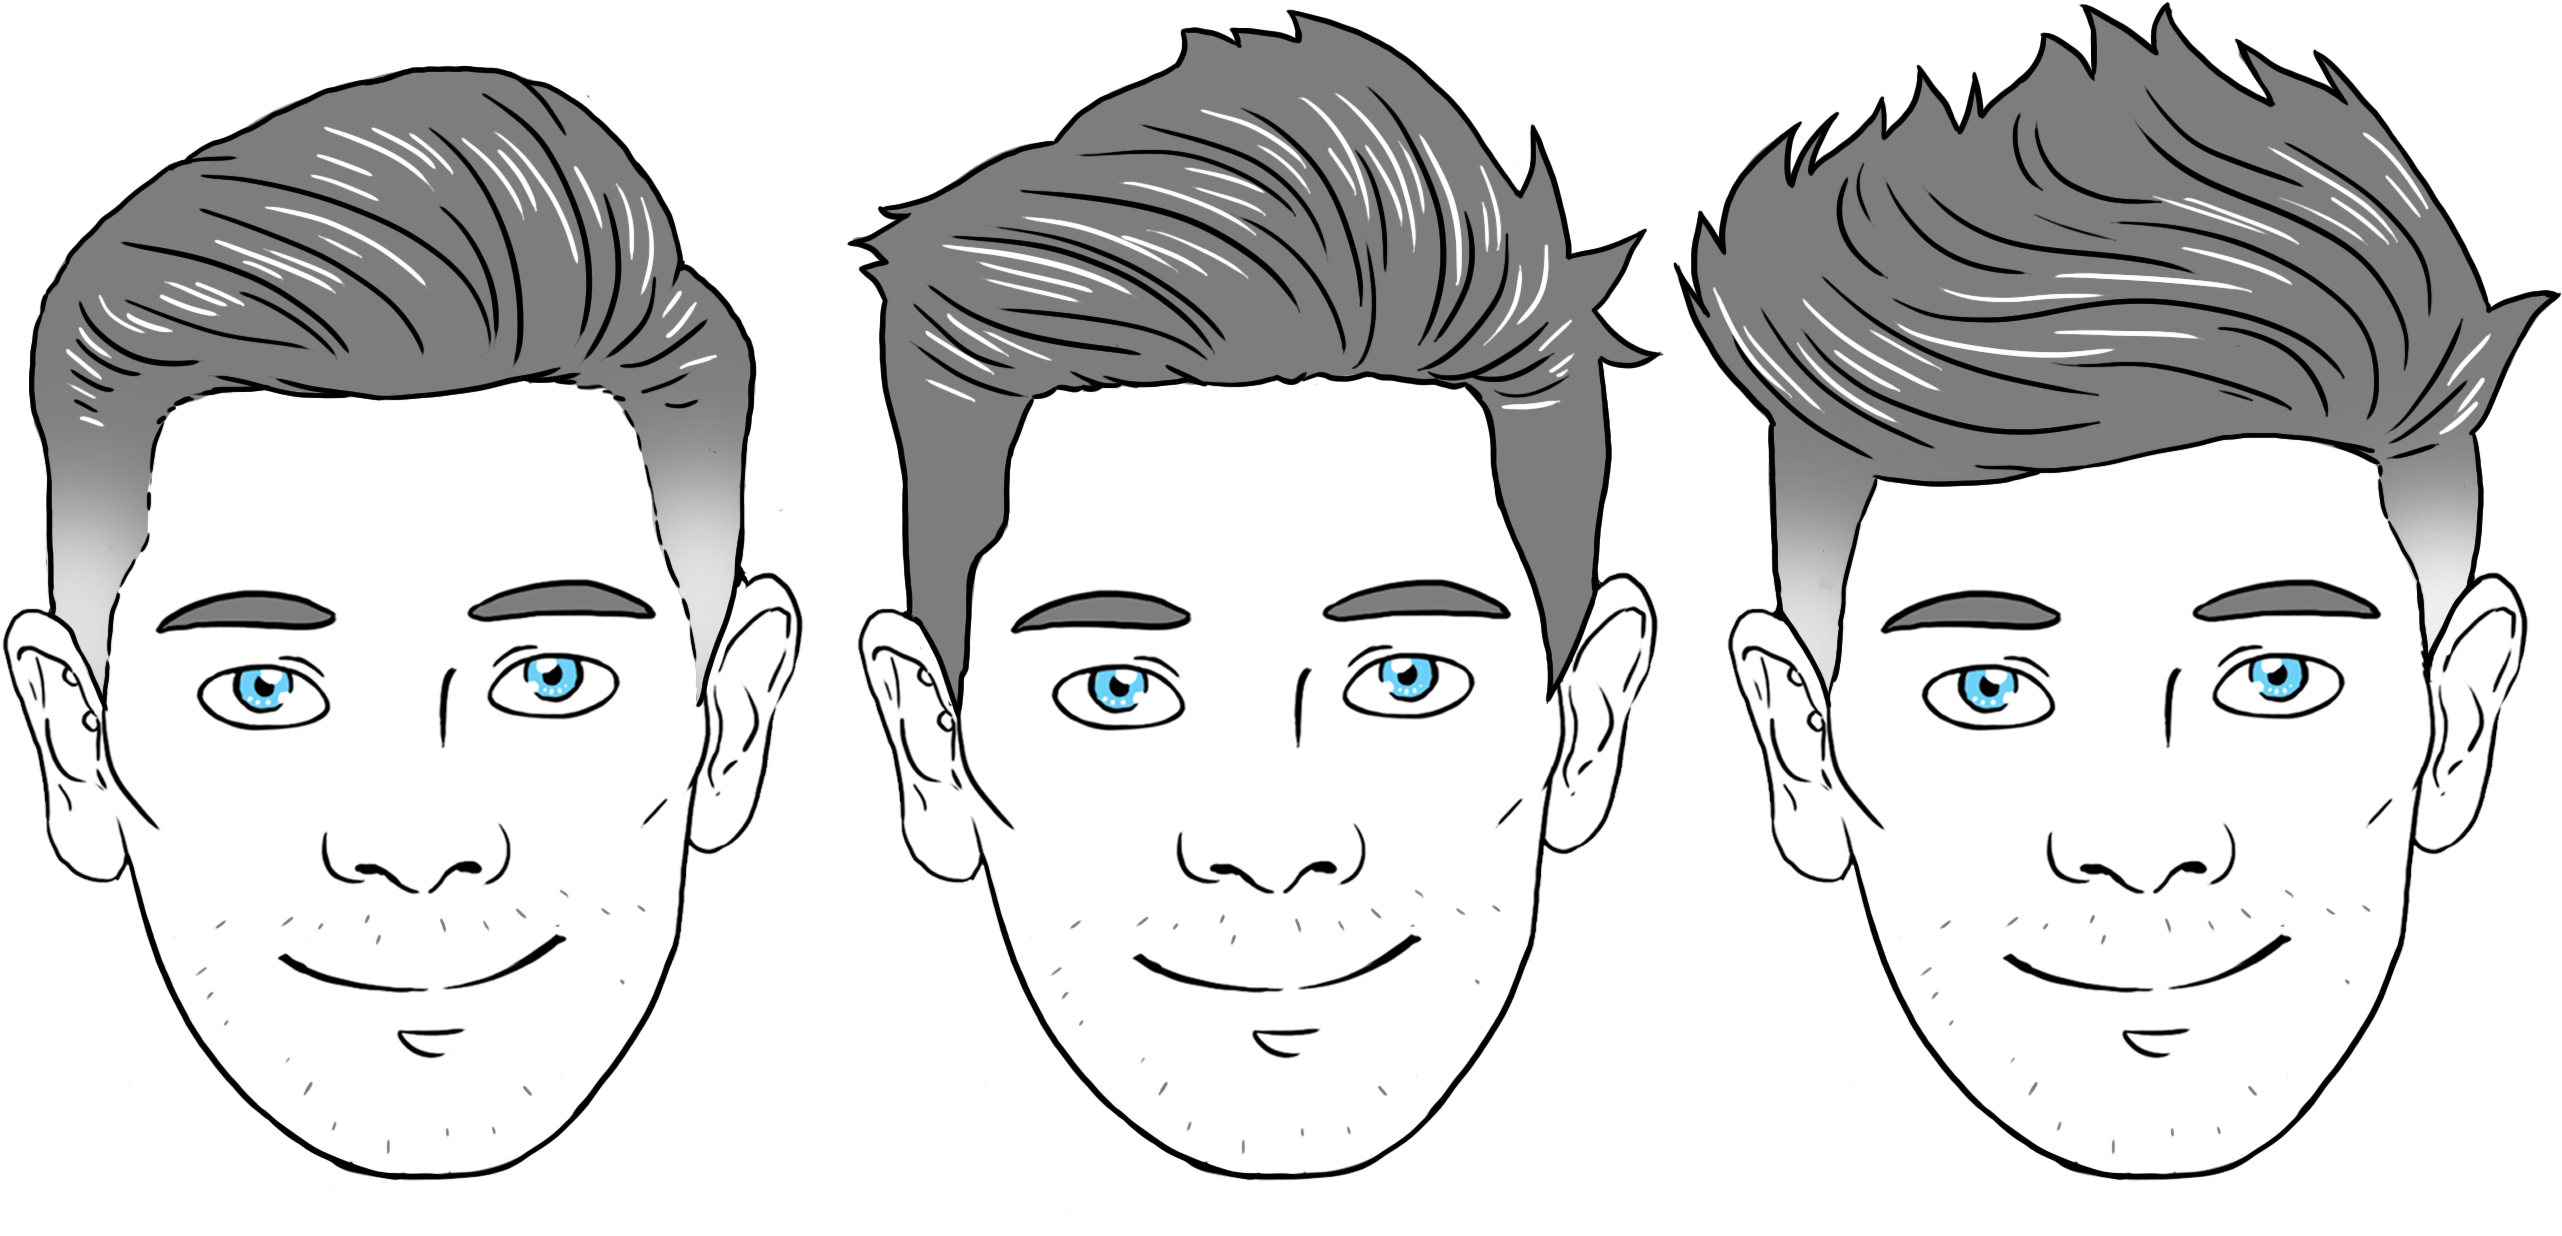 A Man's Face With Different Hair Styles